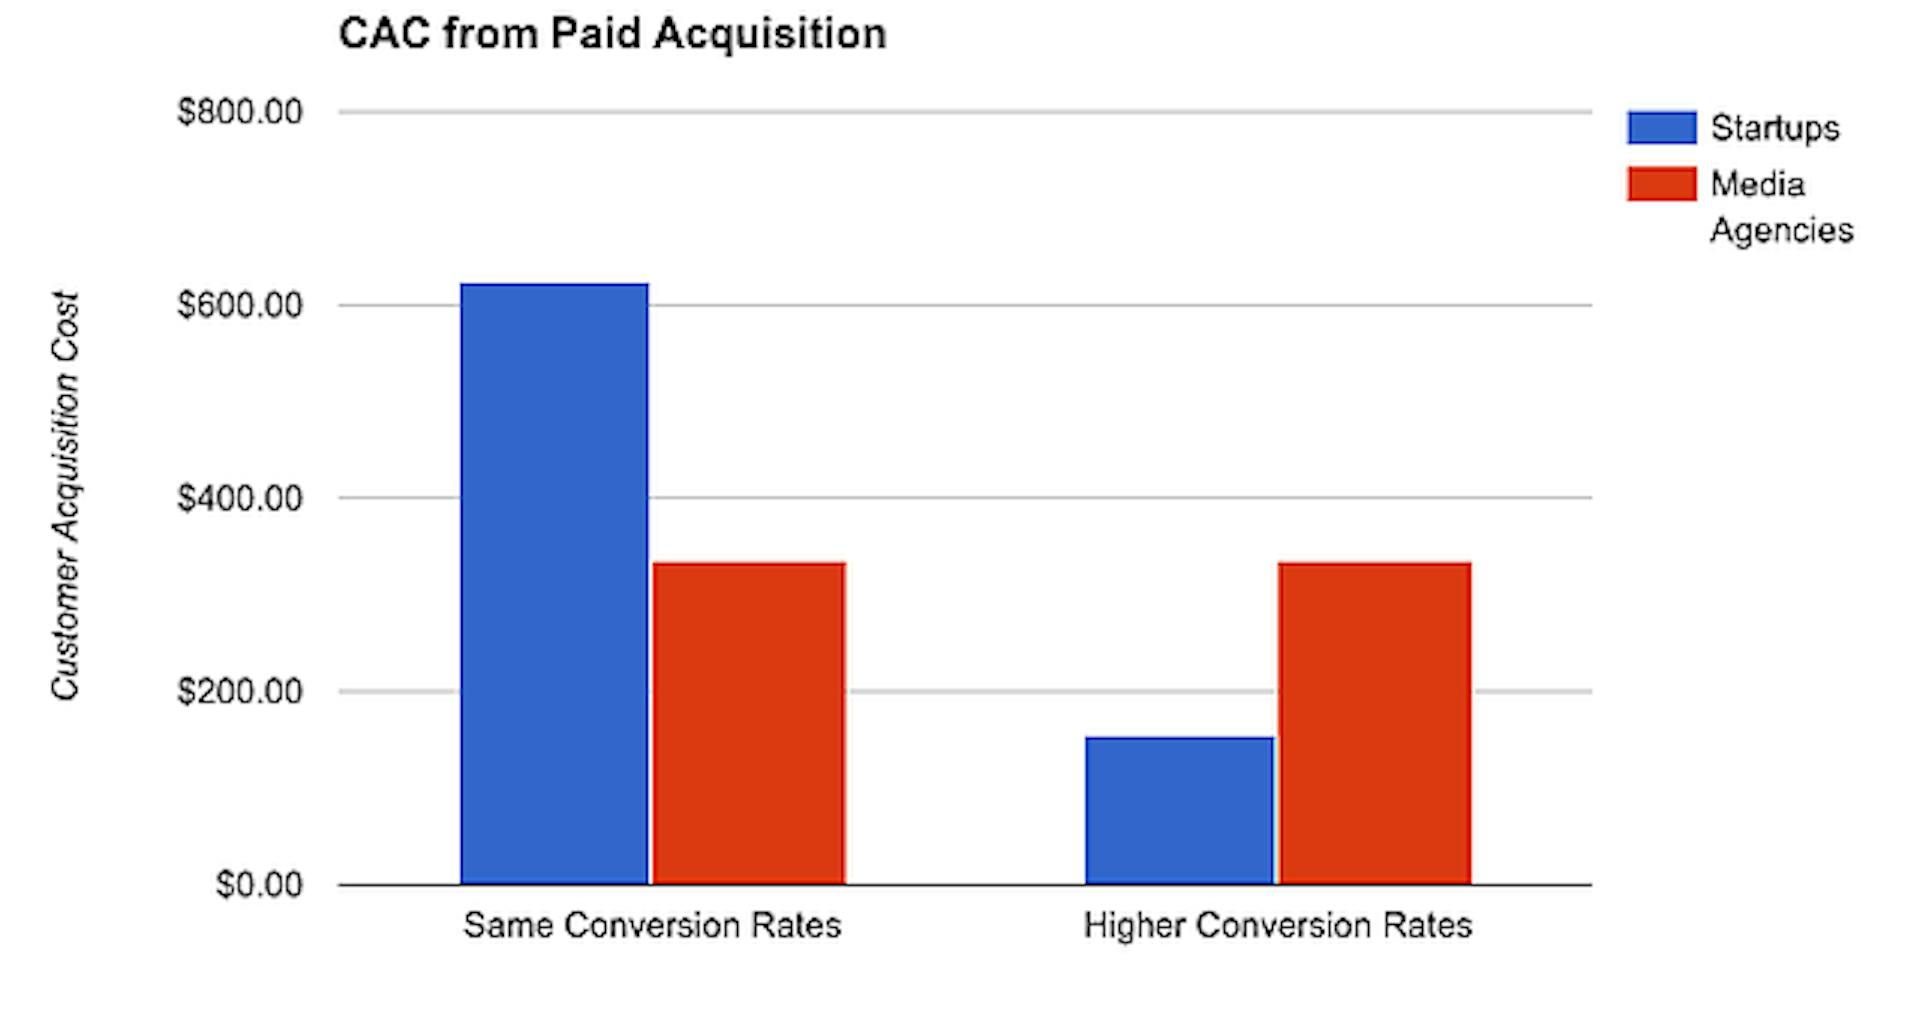 CAC from Paid Acquisition